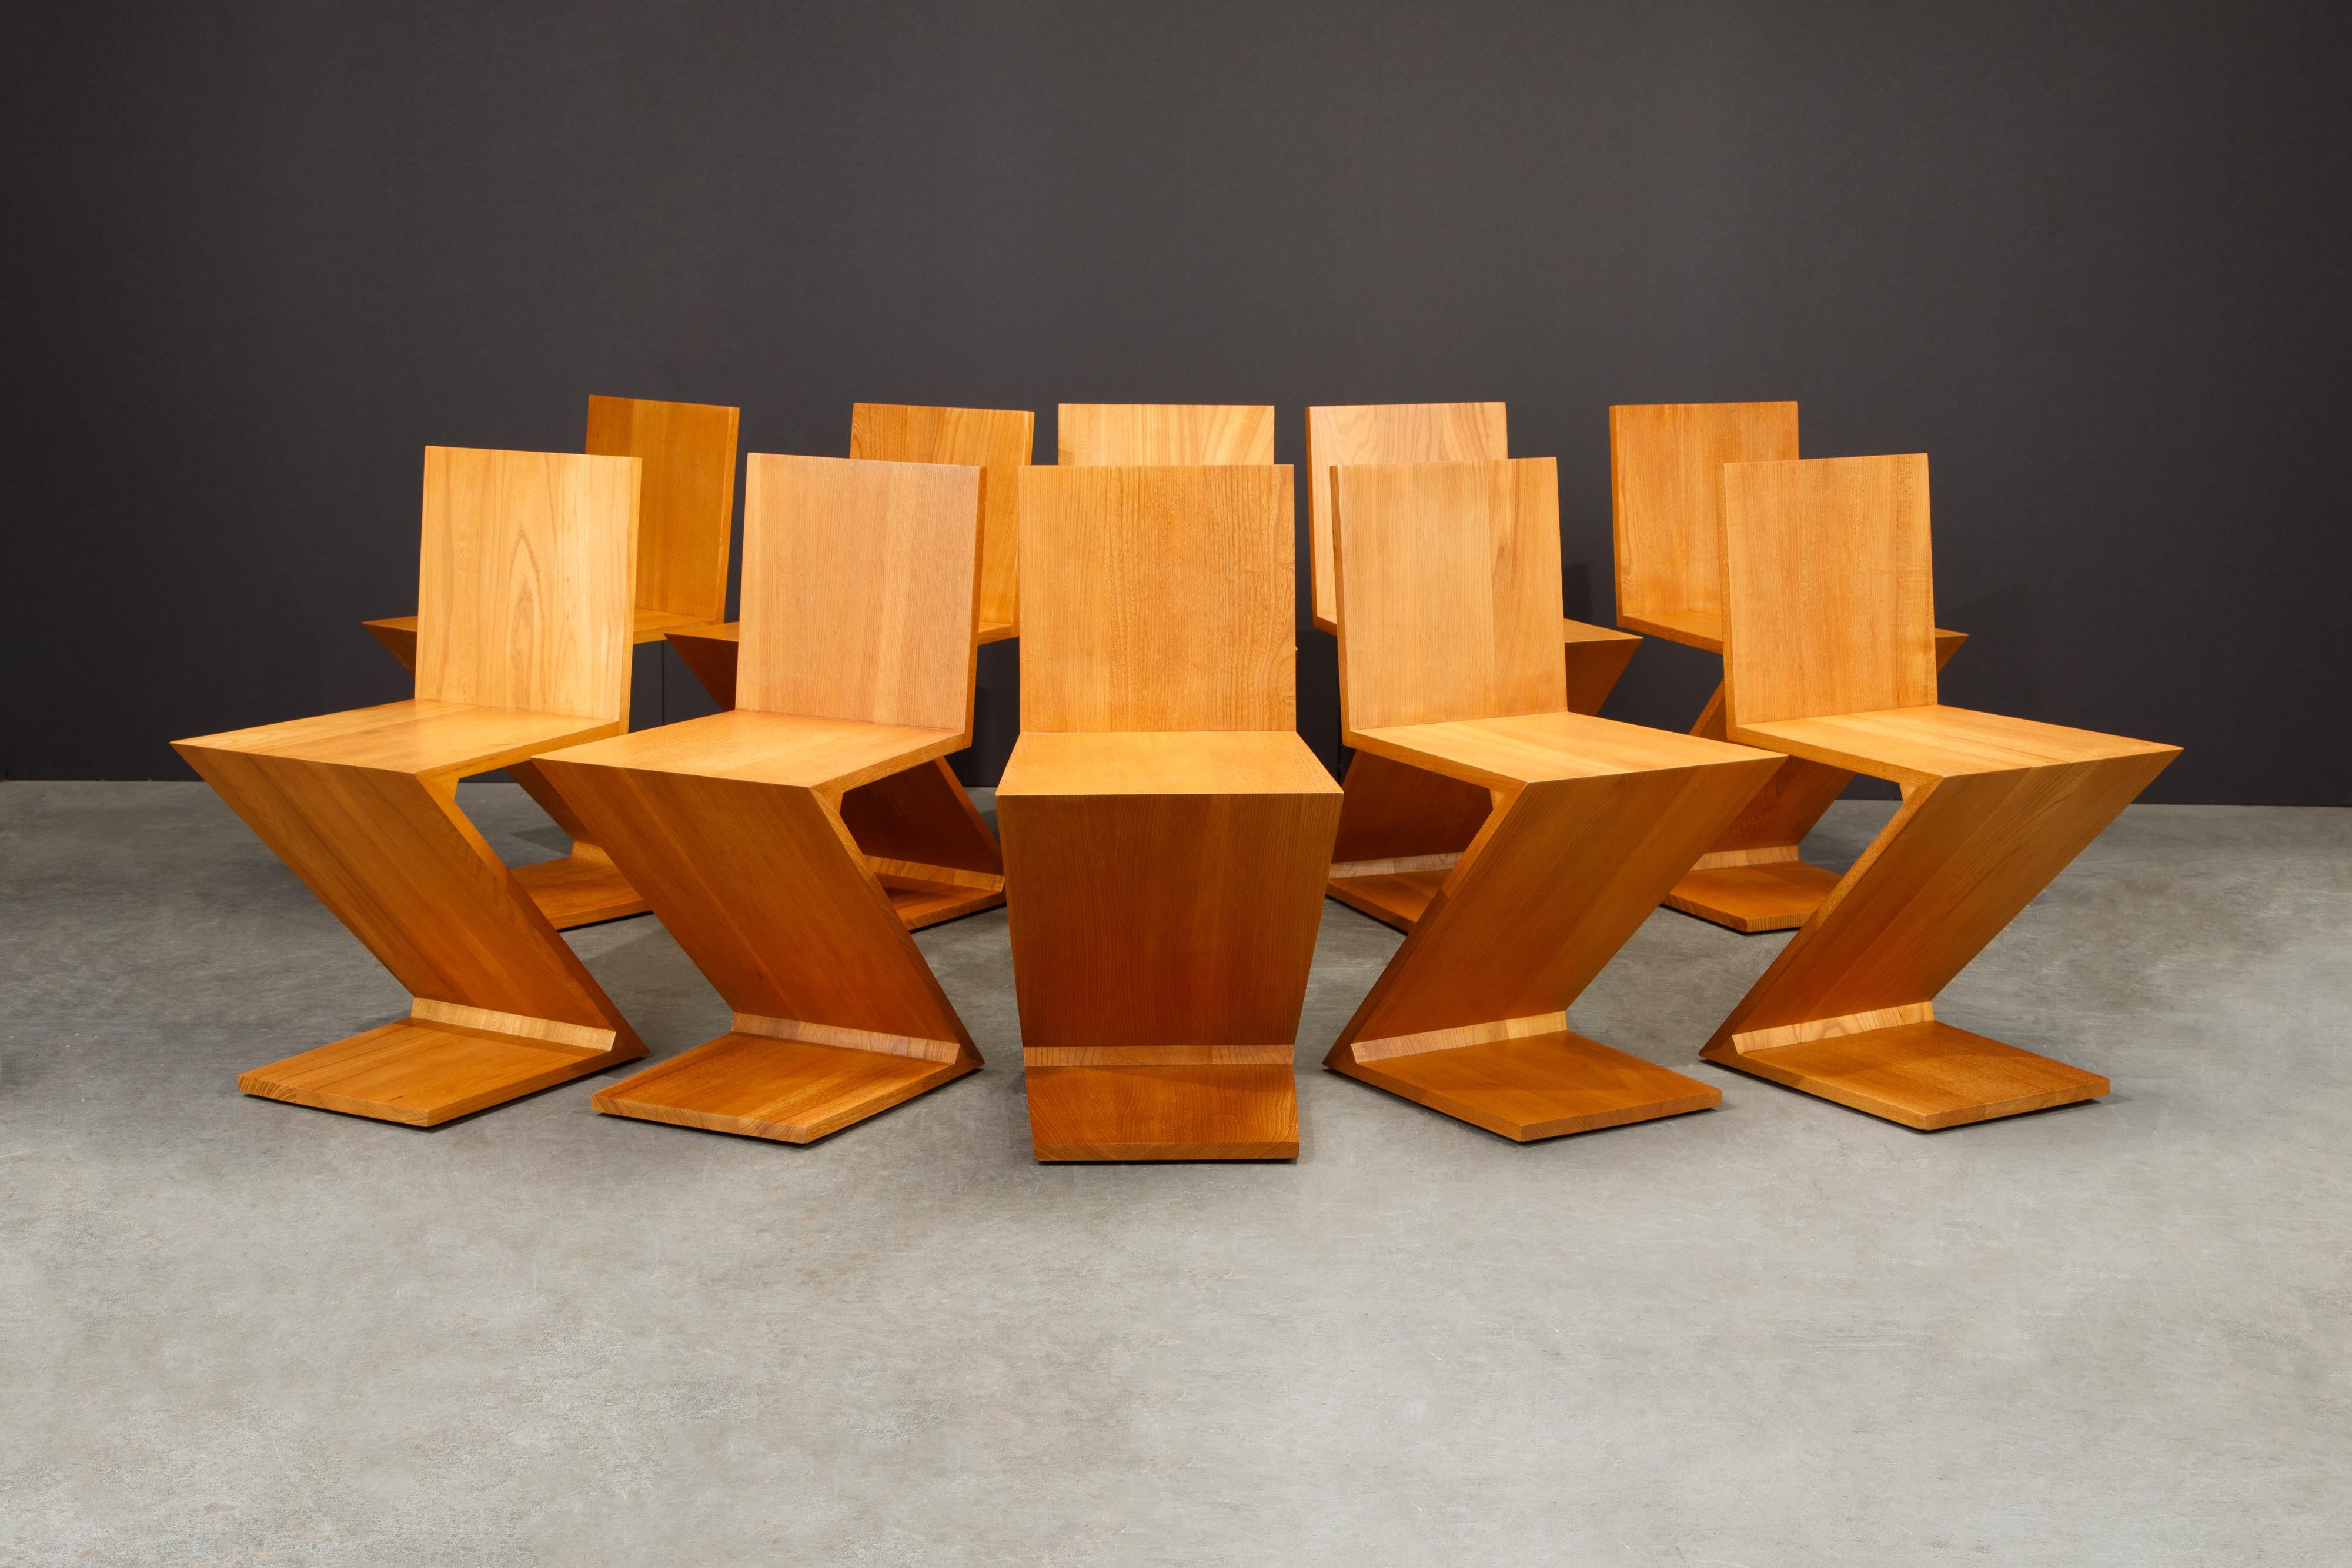 De Stijl Set of Ten Early 'Zig Zag' Chairs by Gerrit Rietveld for Cassina, 1973, Signed For Sale